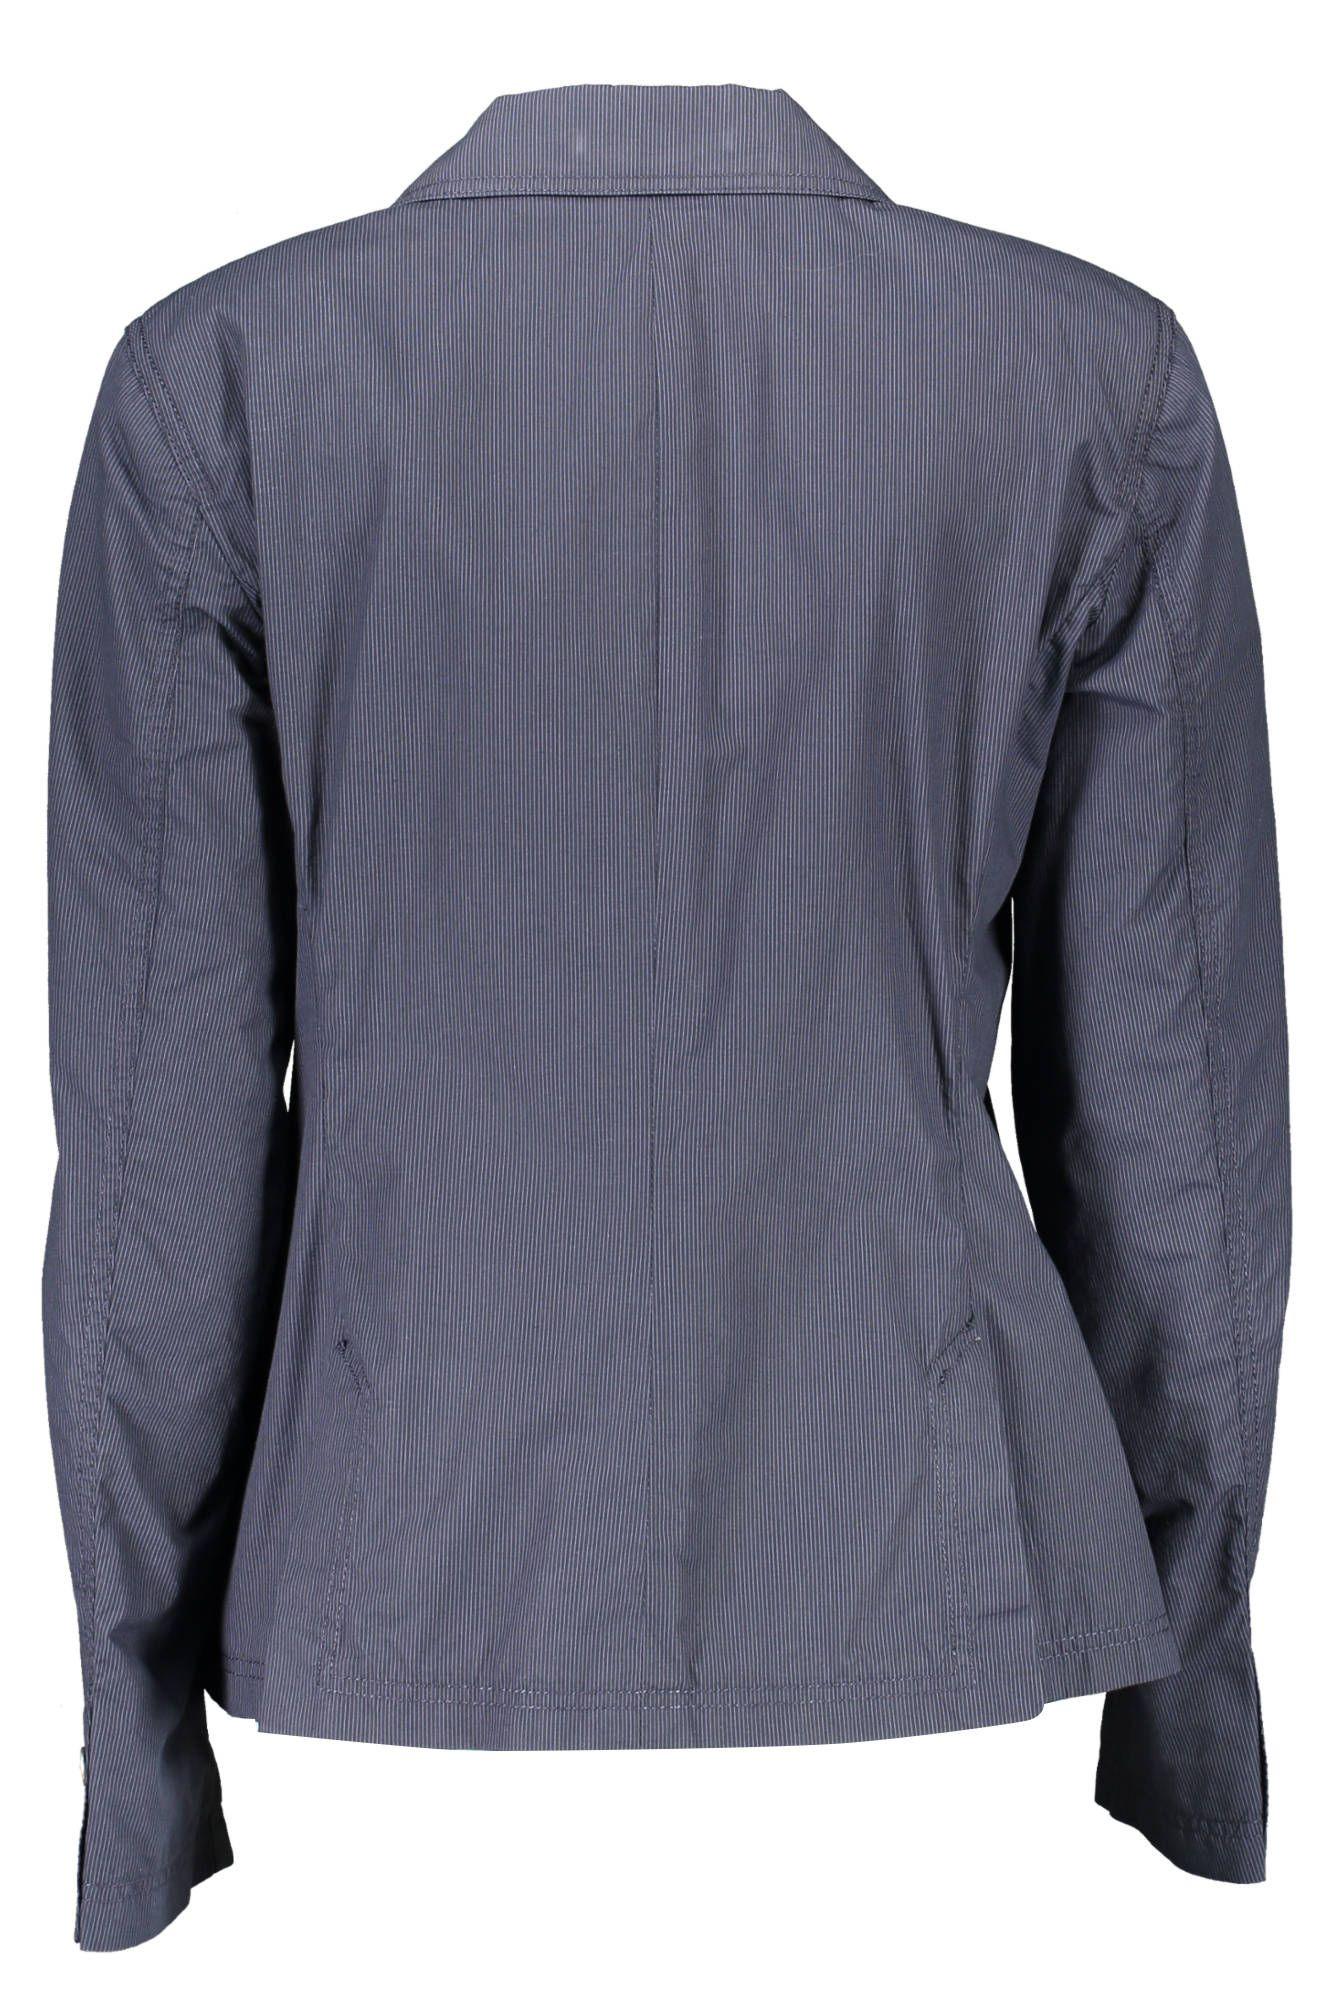 Gant Timeless Blue Cotton Jacket with Classic Appeal - PER.FASHION